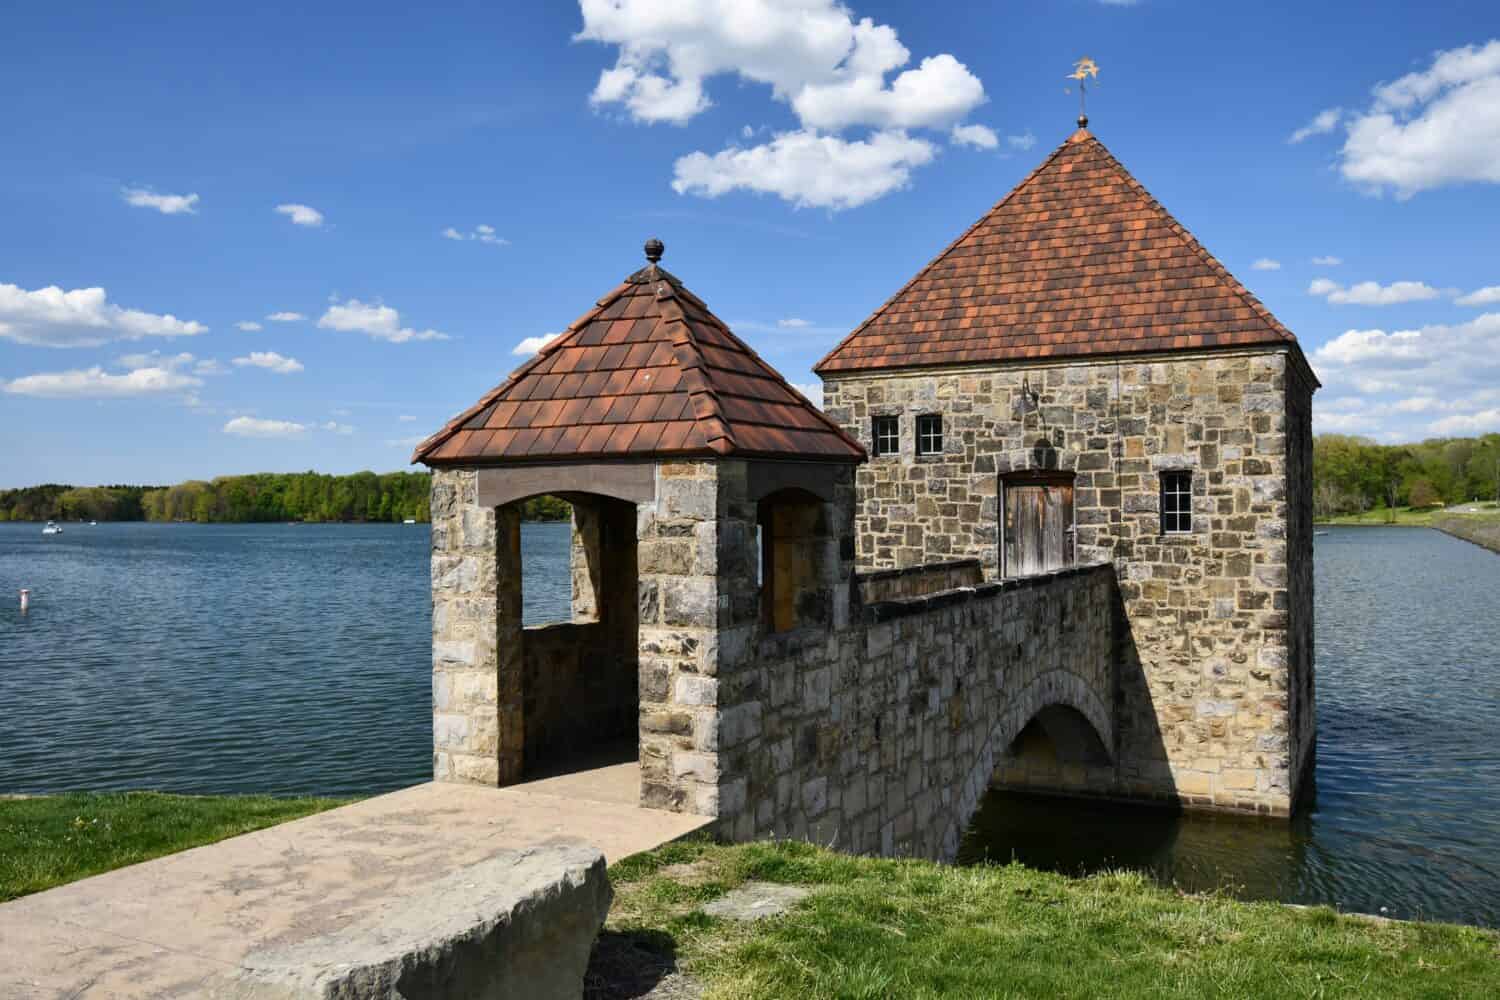 A scenic view of an old stone gate house on the water of Pymatuning Reservoir lake in USA